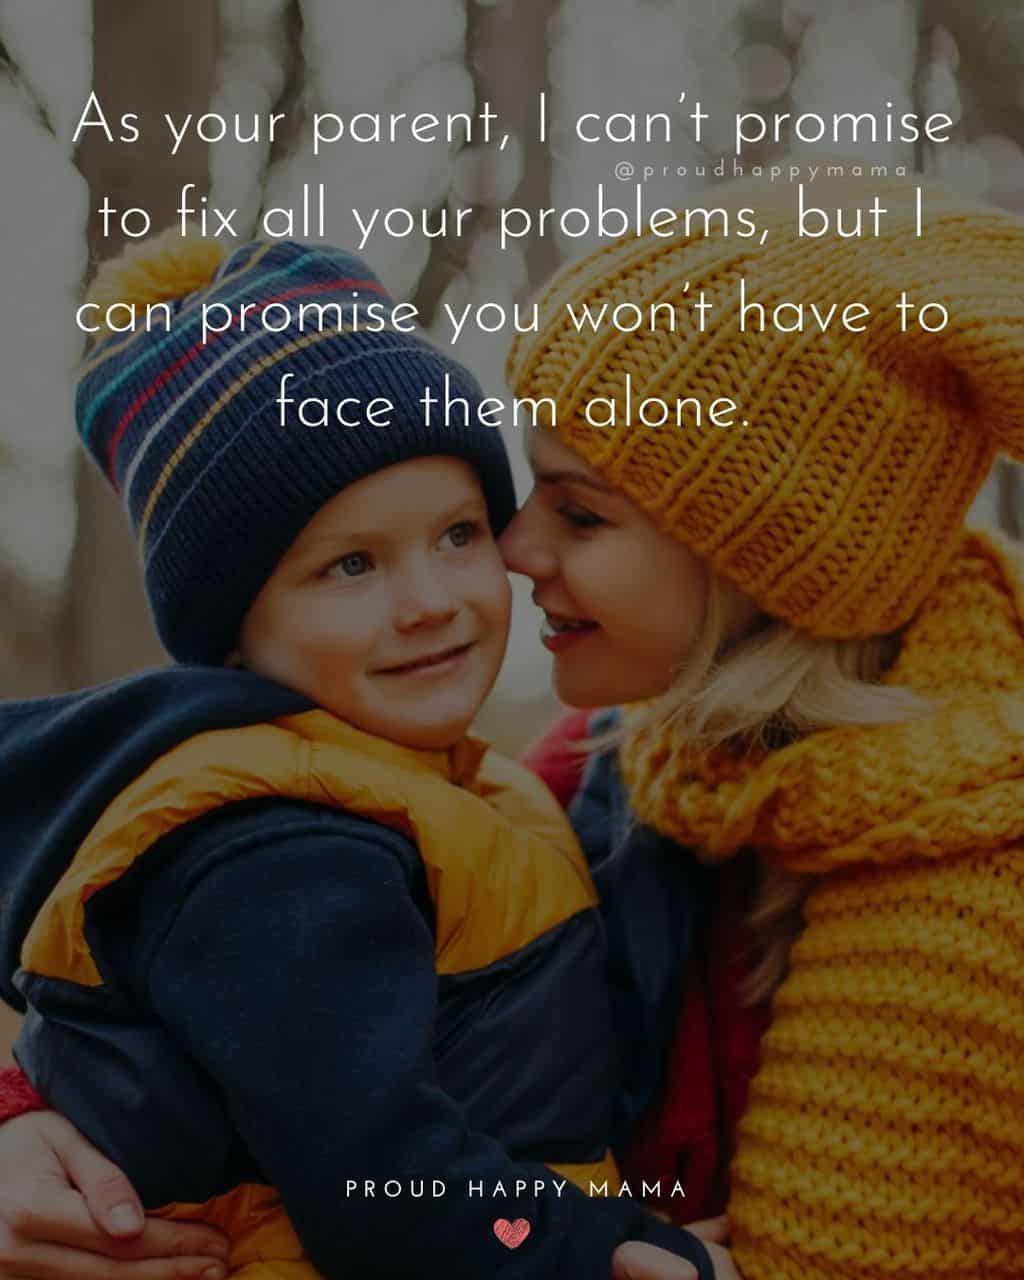 Parenting Quotes - As your parent, I can’t promise to fix all your problems, but I can promise you won’t have to face them alone.’